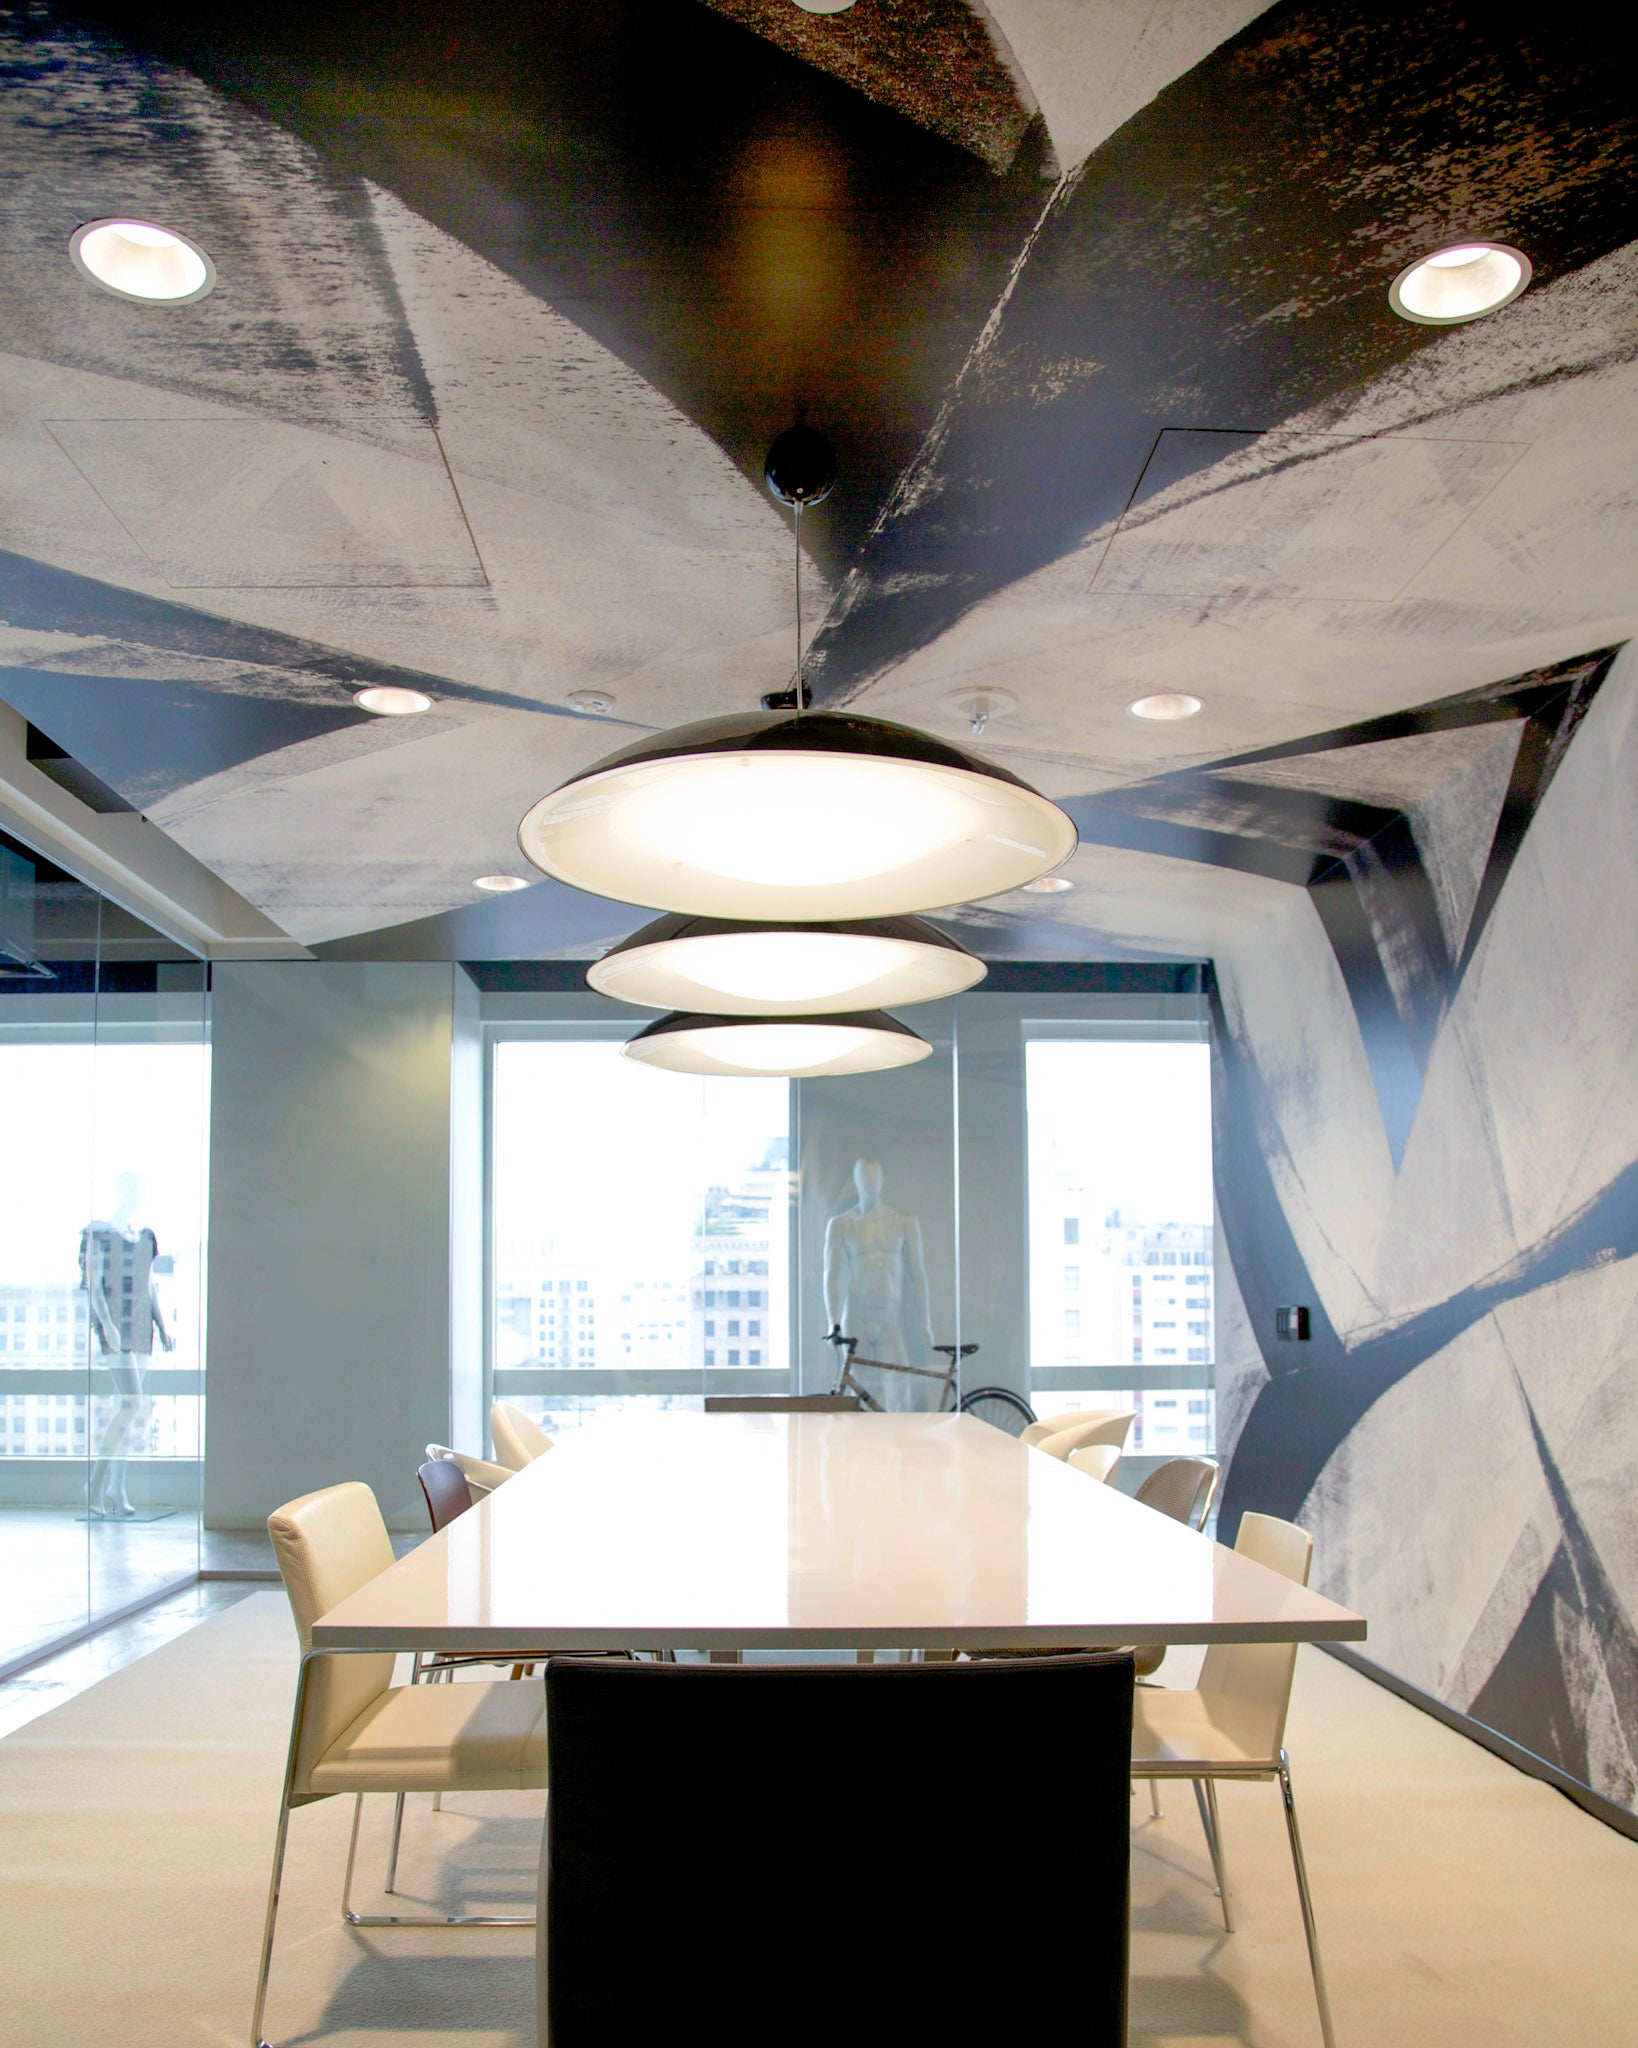 Brookfield Design Hive's productivity suite showcasing WRAPPED Studio's Frank Stella-inspired black-and-white wallcovering and stylish circular lighting.